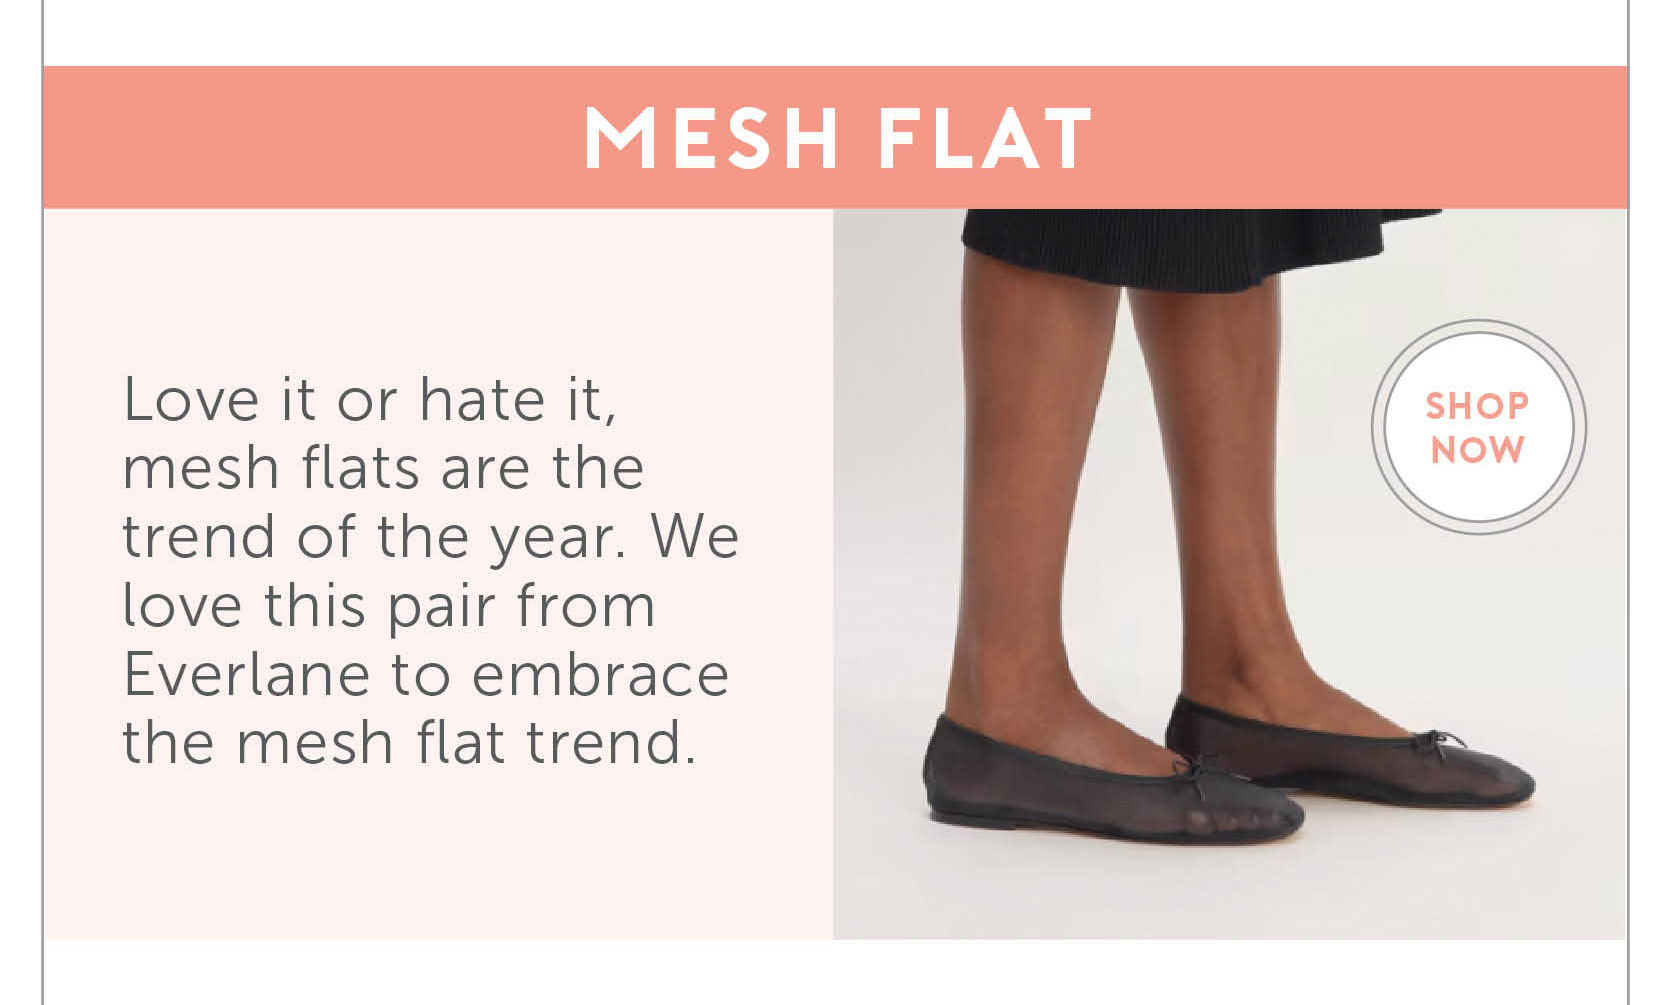 2. Mesh Flat Love it or hate it, mesh flats are the trend of the year. We love this pair from Everlane to embrace the mesh flat trend